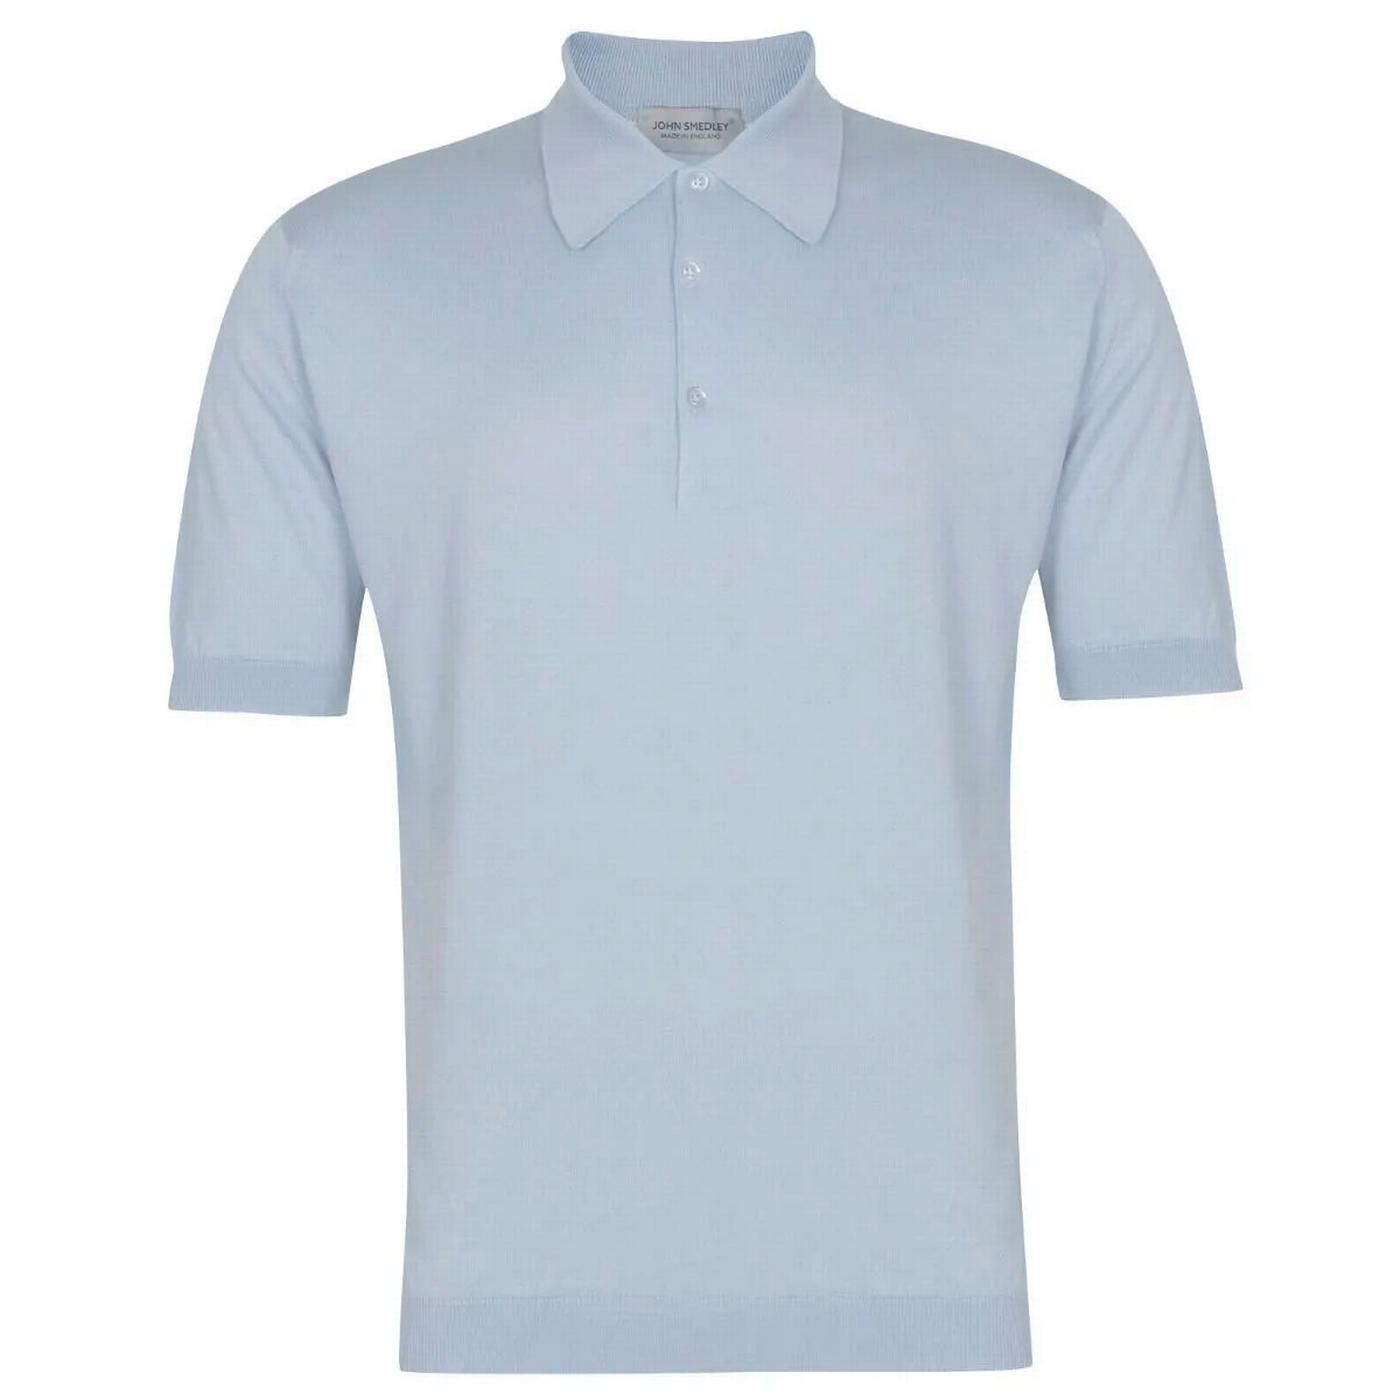 Isis JOHN SMEDLEY Made in England Polo Top in Coast Blue